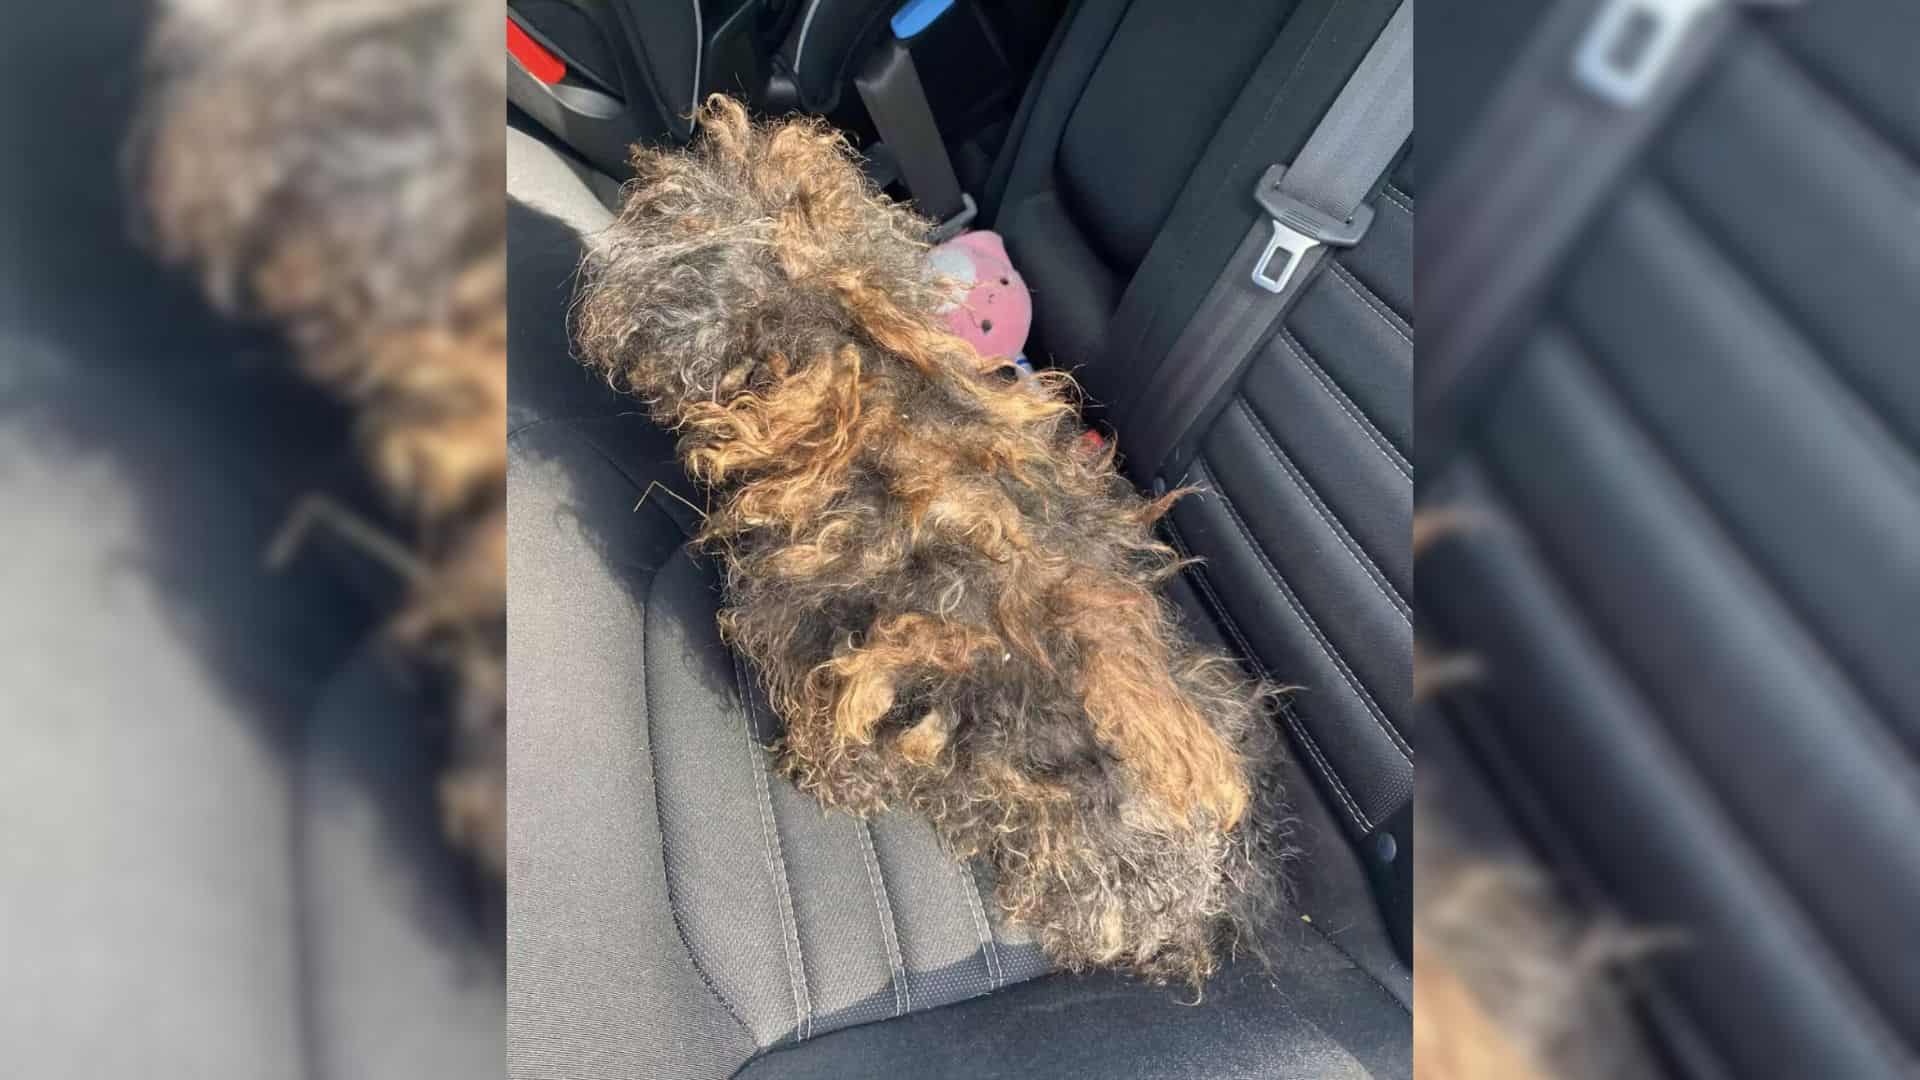 Woman Was Shocked When She Saw A Mysterious Wig On The Road, So She Decided To Investigate